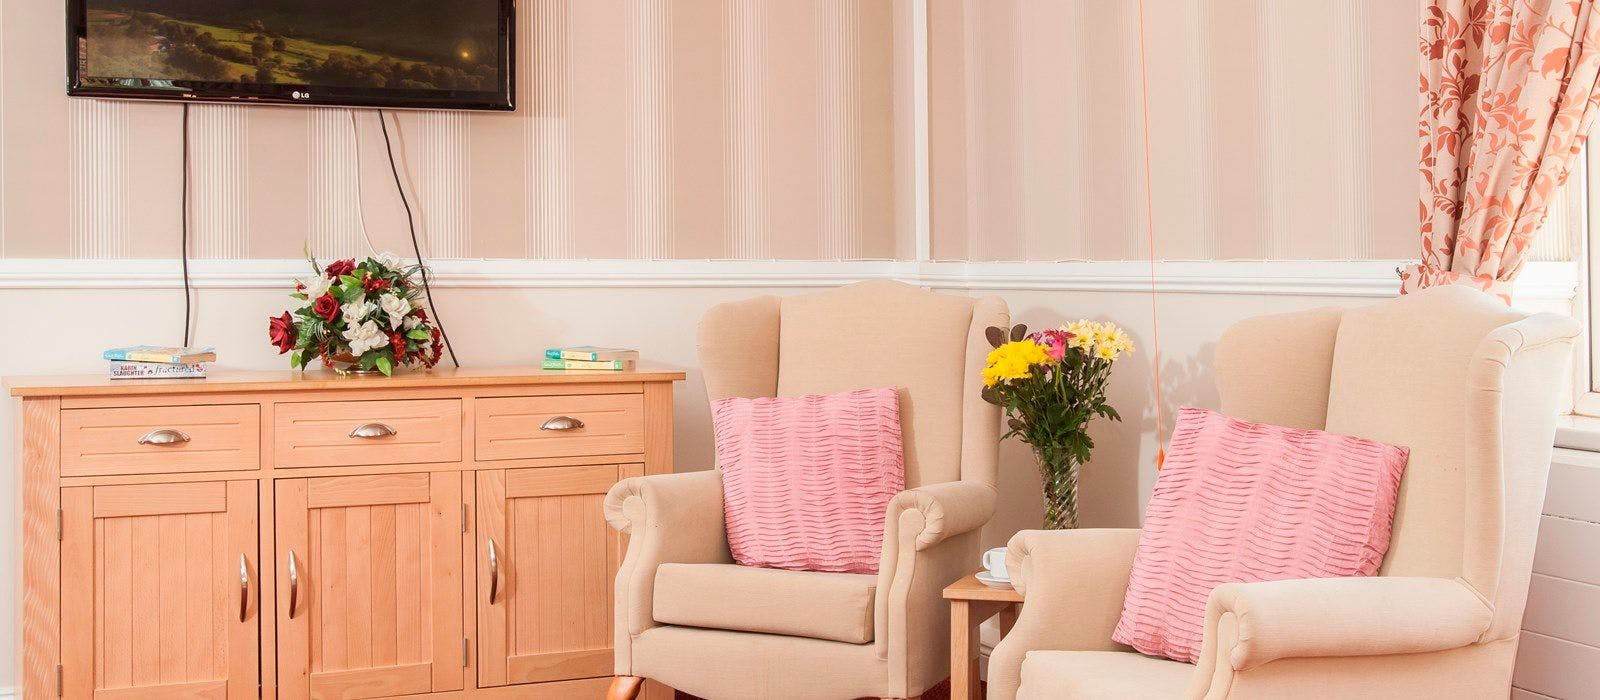 The lounge area at Maple Lodge Care Home in Sunderland, Tyne and Wear